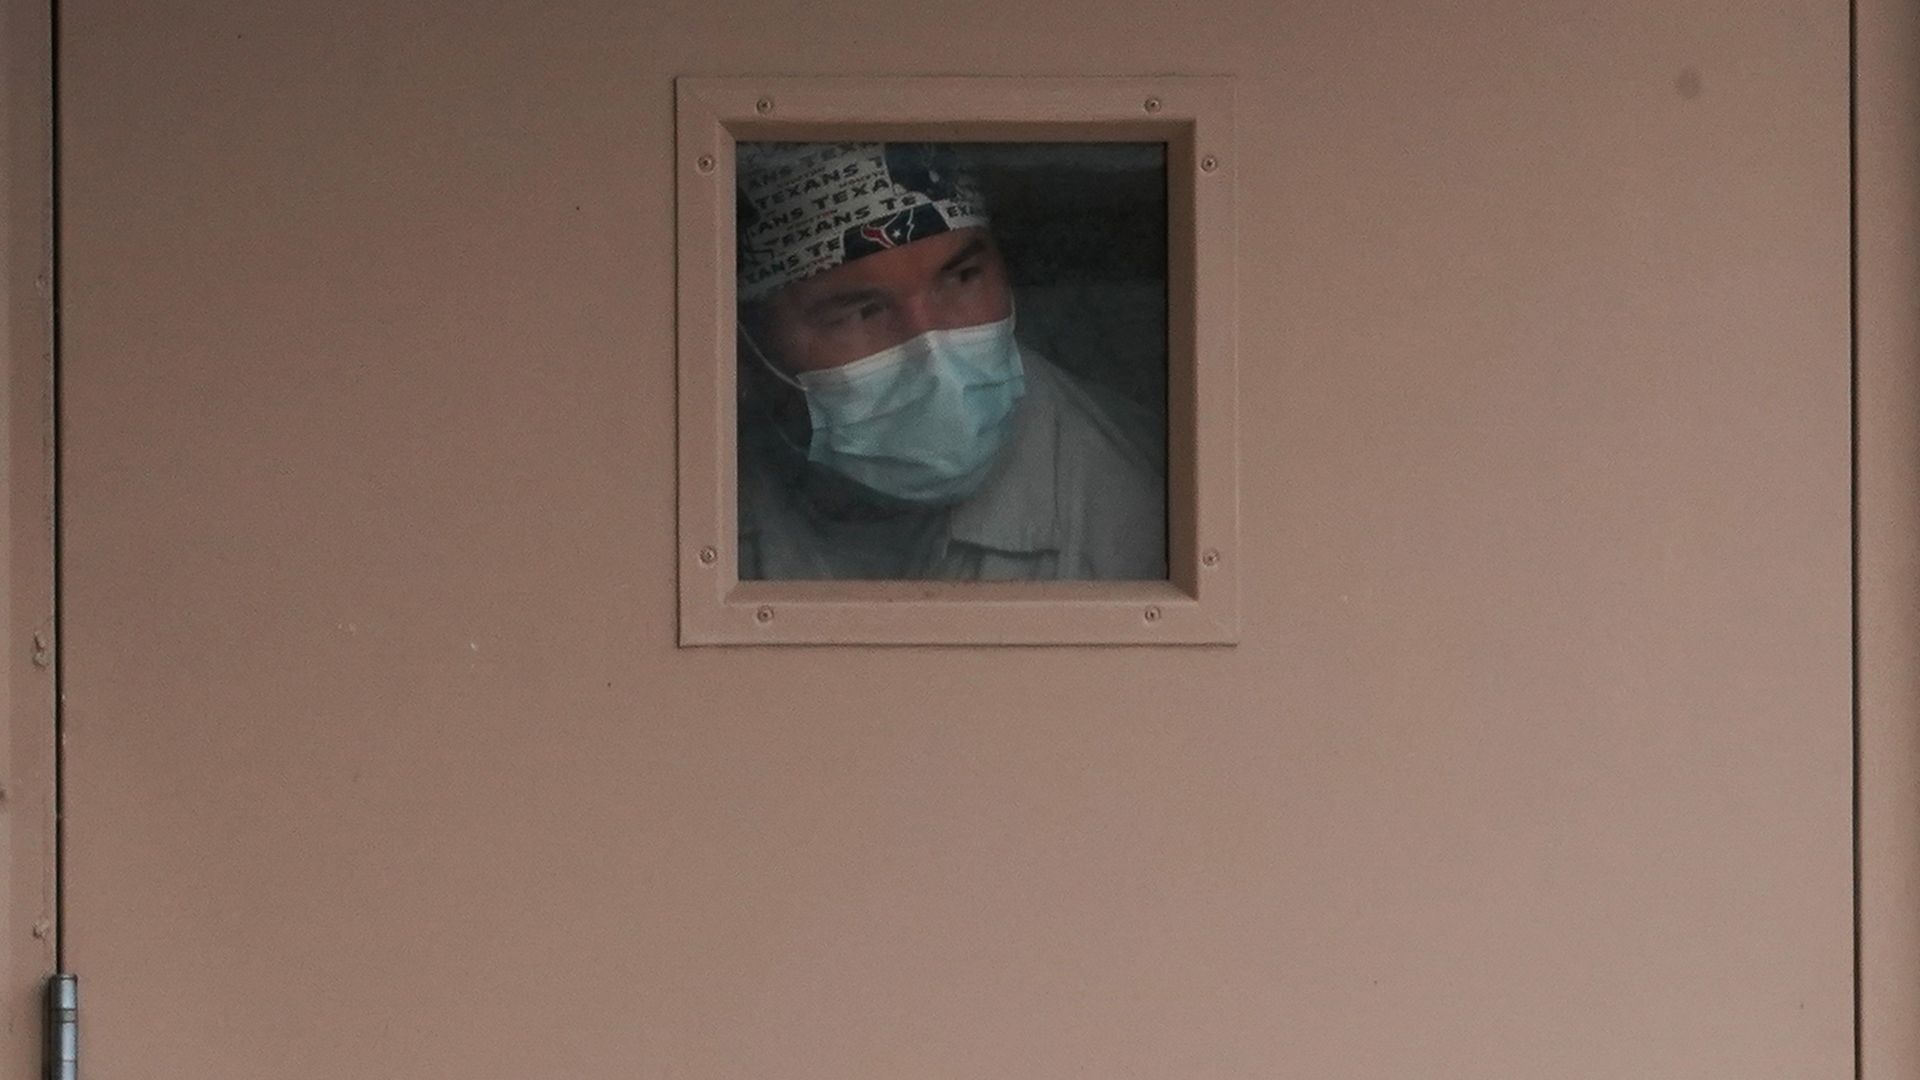 In this image, a man wearing a face mask stands in front of a tiny window.